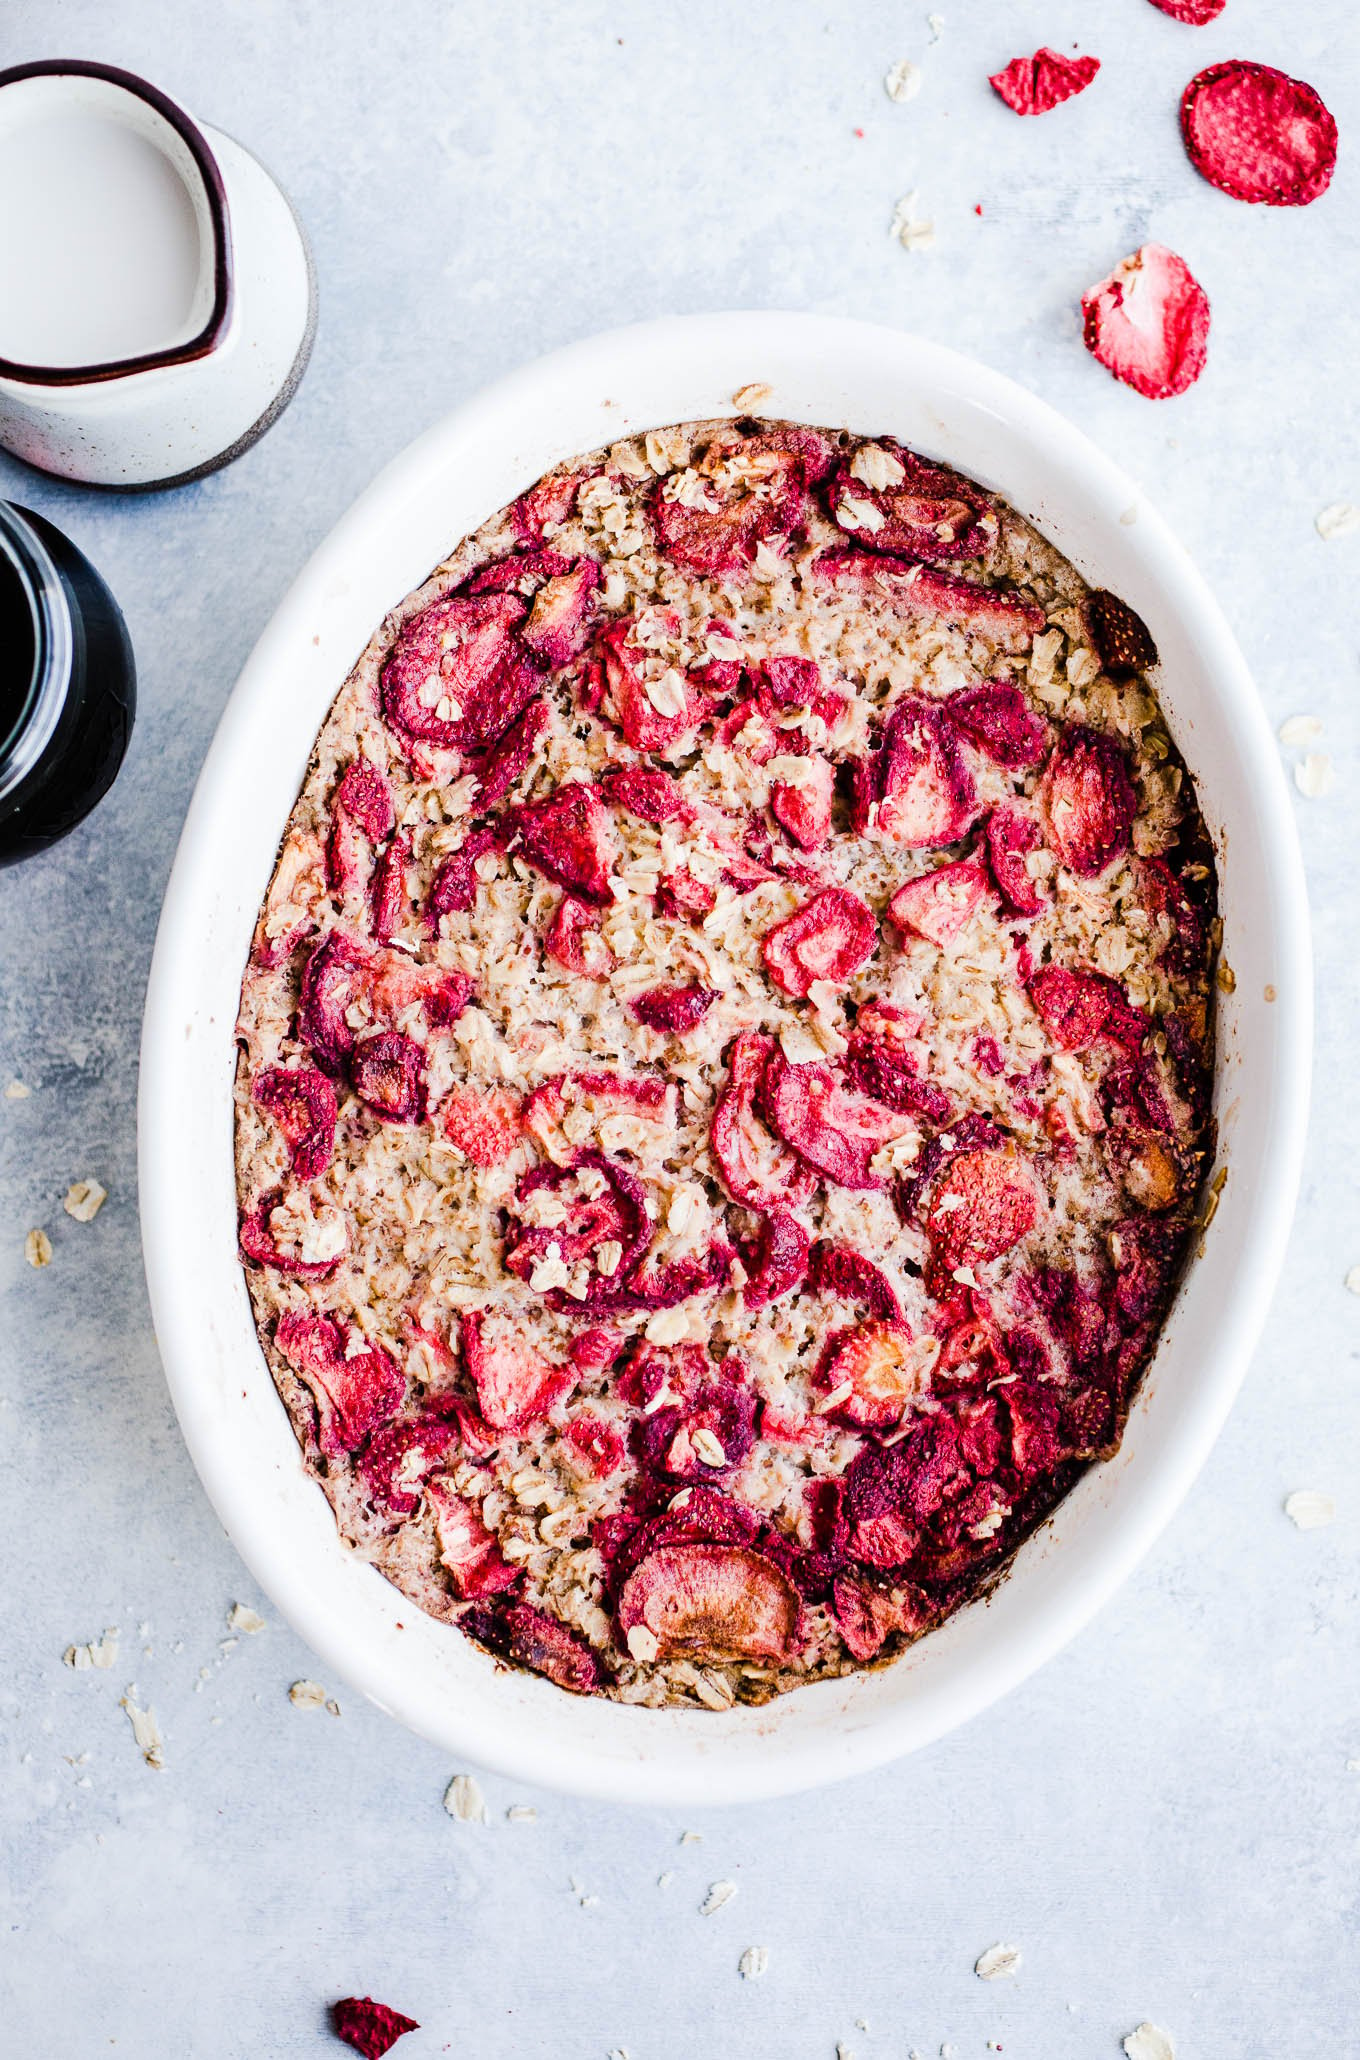 Strawberry Baked Oatmeal in a white oval dish with freeze-dried strawberries.